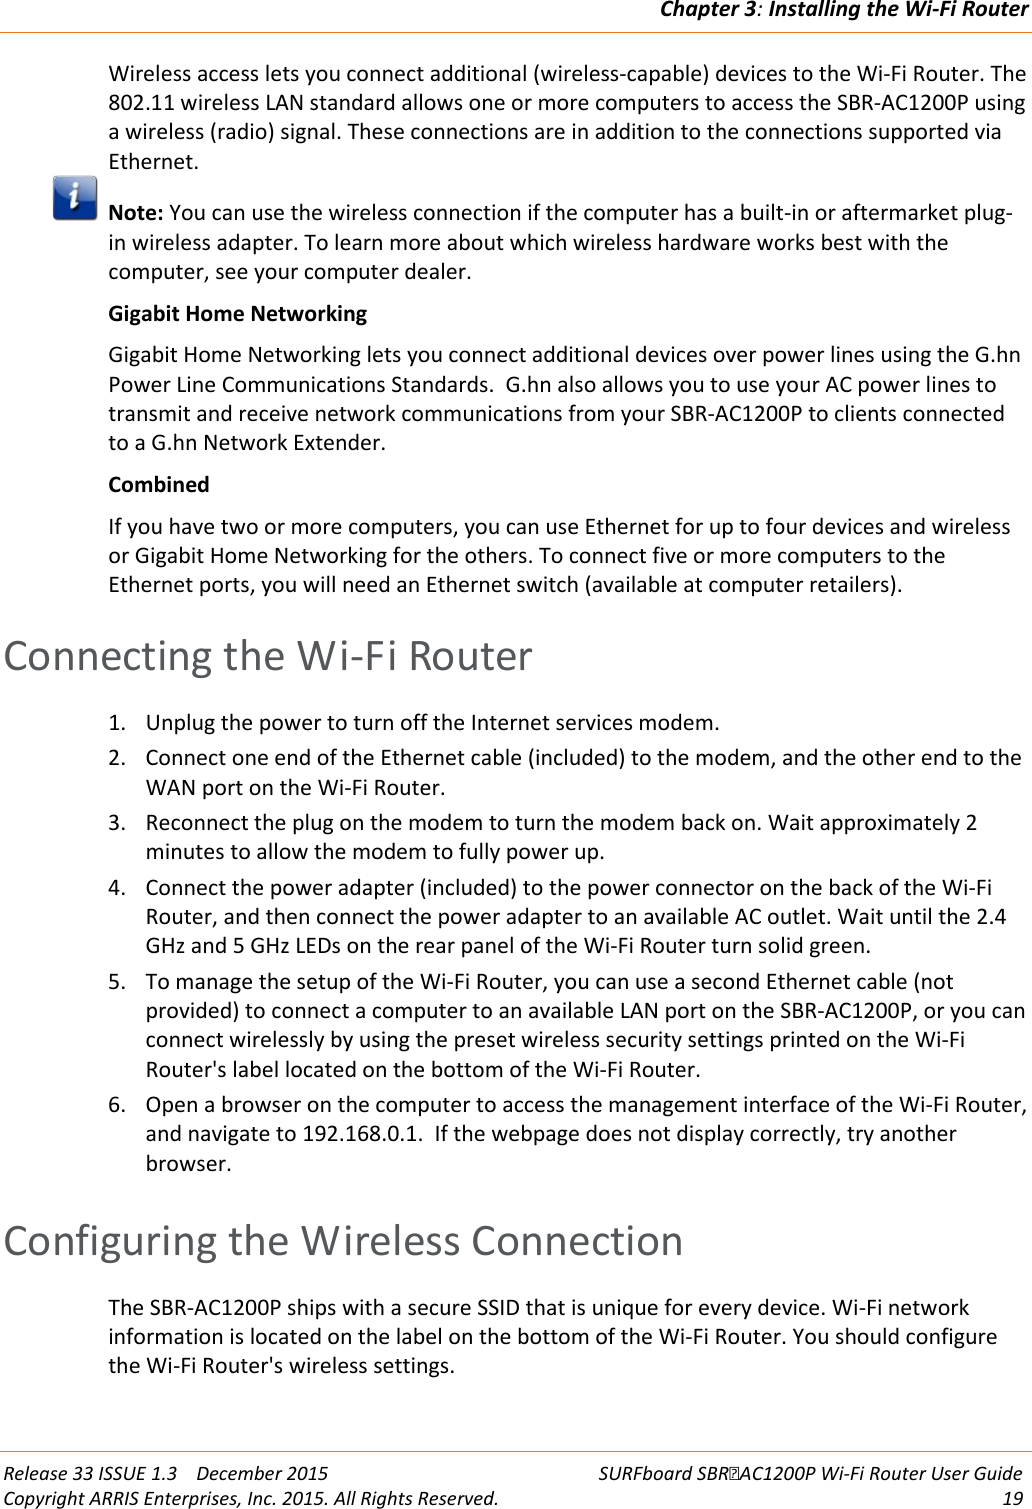 Chapter 3: Installing the Wi-Fi Router  Release 33 ISSUE 1.3    December 2015 SURFboard SBRAC1200P Wi-Fi Router User Guide Copyright ARRIS Enterprises, Inc. 2015. All Rights Reserved. 19  Wireless access lets you connect additional (wireless-capable) devices to the Wi-Fi Router. The 802.11 wireless LAN standard allows one or more computers to access the SBR-AC1200P using a wireless (radio) signal. These connections are in addition to the connections supported via Ethernet.  Note: You can use the wireless connection if the computer has a built-in or aftermarket plug-in wireless adapter. To learn more about which wireless hardware works best with the computer, see your computer dealer. Gigabit Home Networking Gigabit Home Networking lets you connect additional devices over power lines using the G.hn Power Line Communications Standards.  G.hn also allows you to use your AC power lines to transmit and receive network communications from your SBR-AC1200P to clients connected to a G.hn Network Extender. Combined If you have two or more computers, you can use Ethernet for up to four devices and wireless or Gigabit Home Networking for the others. To connect five or more computers to the Ethernet ports, you will need an Ethernet switch (available at computer retailers).   Connecting the Wi-Fi Router 1. Unplug the power to turn off the Internet services modem.  2. Connect one end of the Ethernet cable (included) to the modem, and the other end to the WAN port on the Wi-Fi Router.  3. Reconnect the plug on the modem to turn the modem back on. Wait approximately 2 minutes to allow the modem to fully power up. 4. Connect the power adapter (included) to the power connector on the back of the Wi-Fi Router, and then connect the power adapter to an available AC outlet. Wait until the 2.4 GHz and 5 GHz LEDs on the rear panel of the Wi-Fi Router turn solid green. 5. To manage the setup of the Wi-Fi Router, you can use a second Ethernet cable (not provided) to connect a computer to an available LAN port on the SBR-AC1200P, or you can connect wirelessly by using the preset wireless security settings printed on the Wi-Fi Router&apos;s label located on the bottom of the Wi-Fi Router. 6. Open a browser on the computer to access the management interface of the Wi-Fi Router, and navigate to 192.168.0.1.  If the webpage does not display correctly, try another browser.   Configuring the Wireless Connection The SBR-AC1200P ships with a secure SSID that is unique for every device. Wi-Fi network information is located on the label on the bottom of the Wi-Fi Router. You should configure the Wi-Fi Router&apos;s wireless settings. 